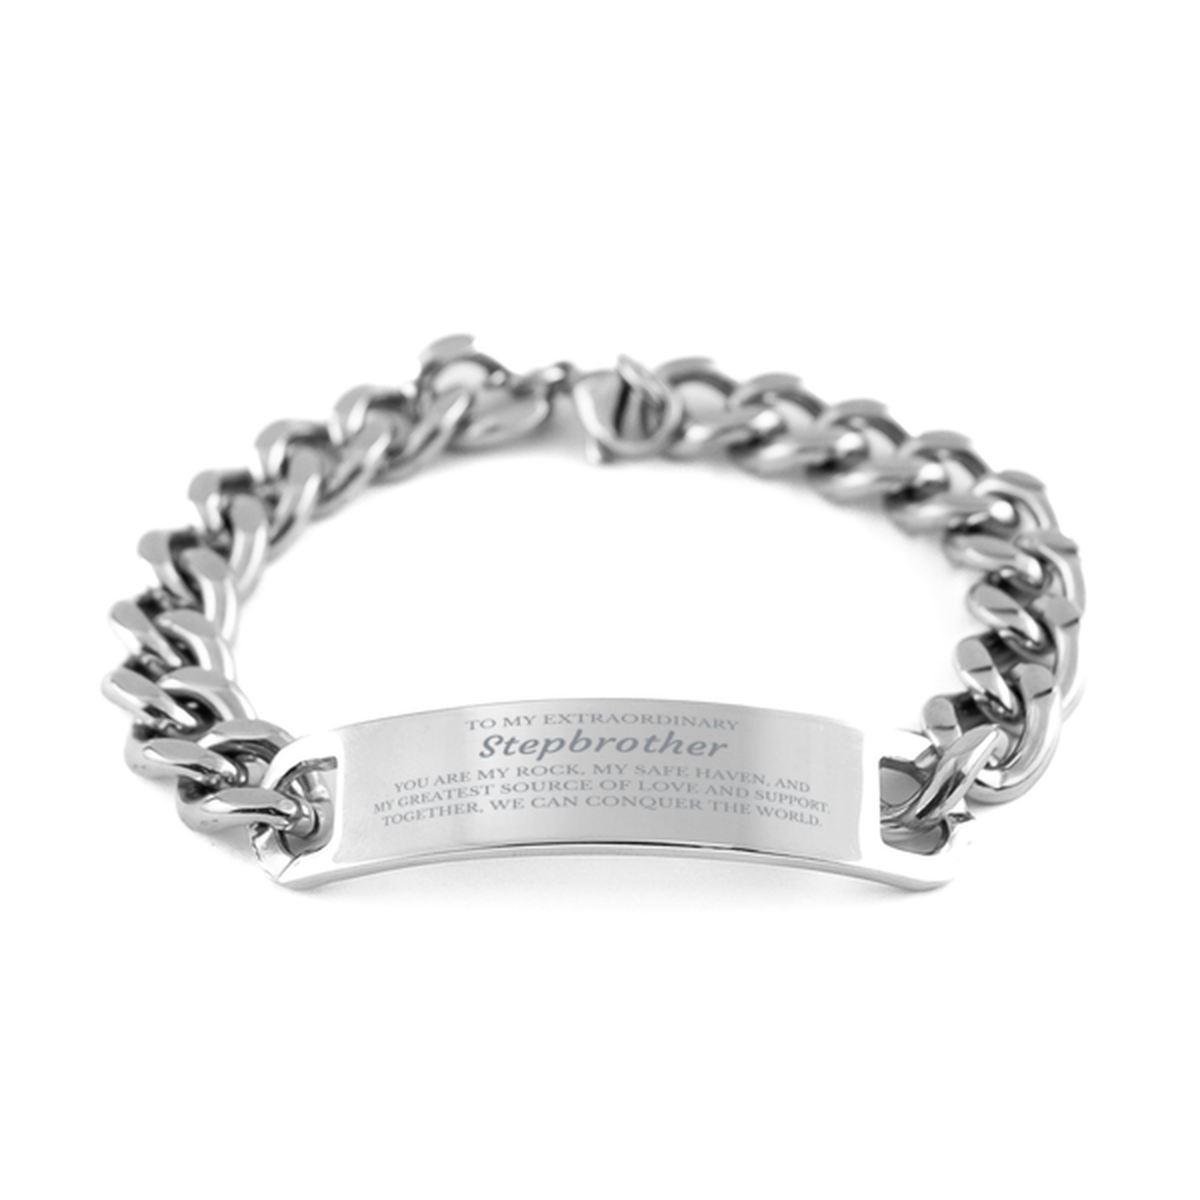 To My Extraordinary Stepbrother Gifts, Together, we can conquer the world, Birthday Cuban Chain Stainless Steel Bracelet For Stepbrother, Christmas Gifts For Stepbrother